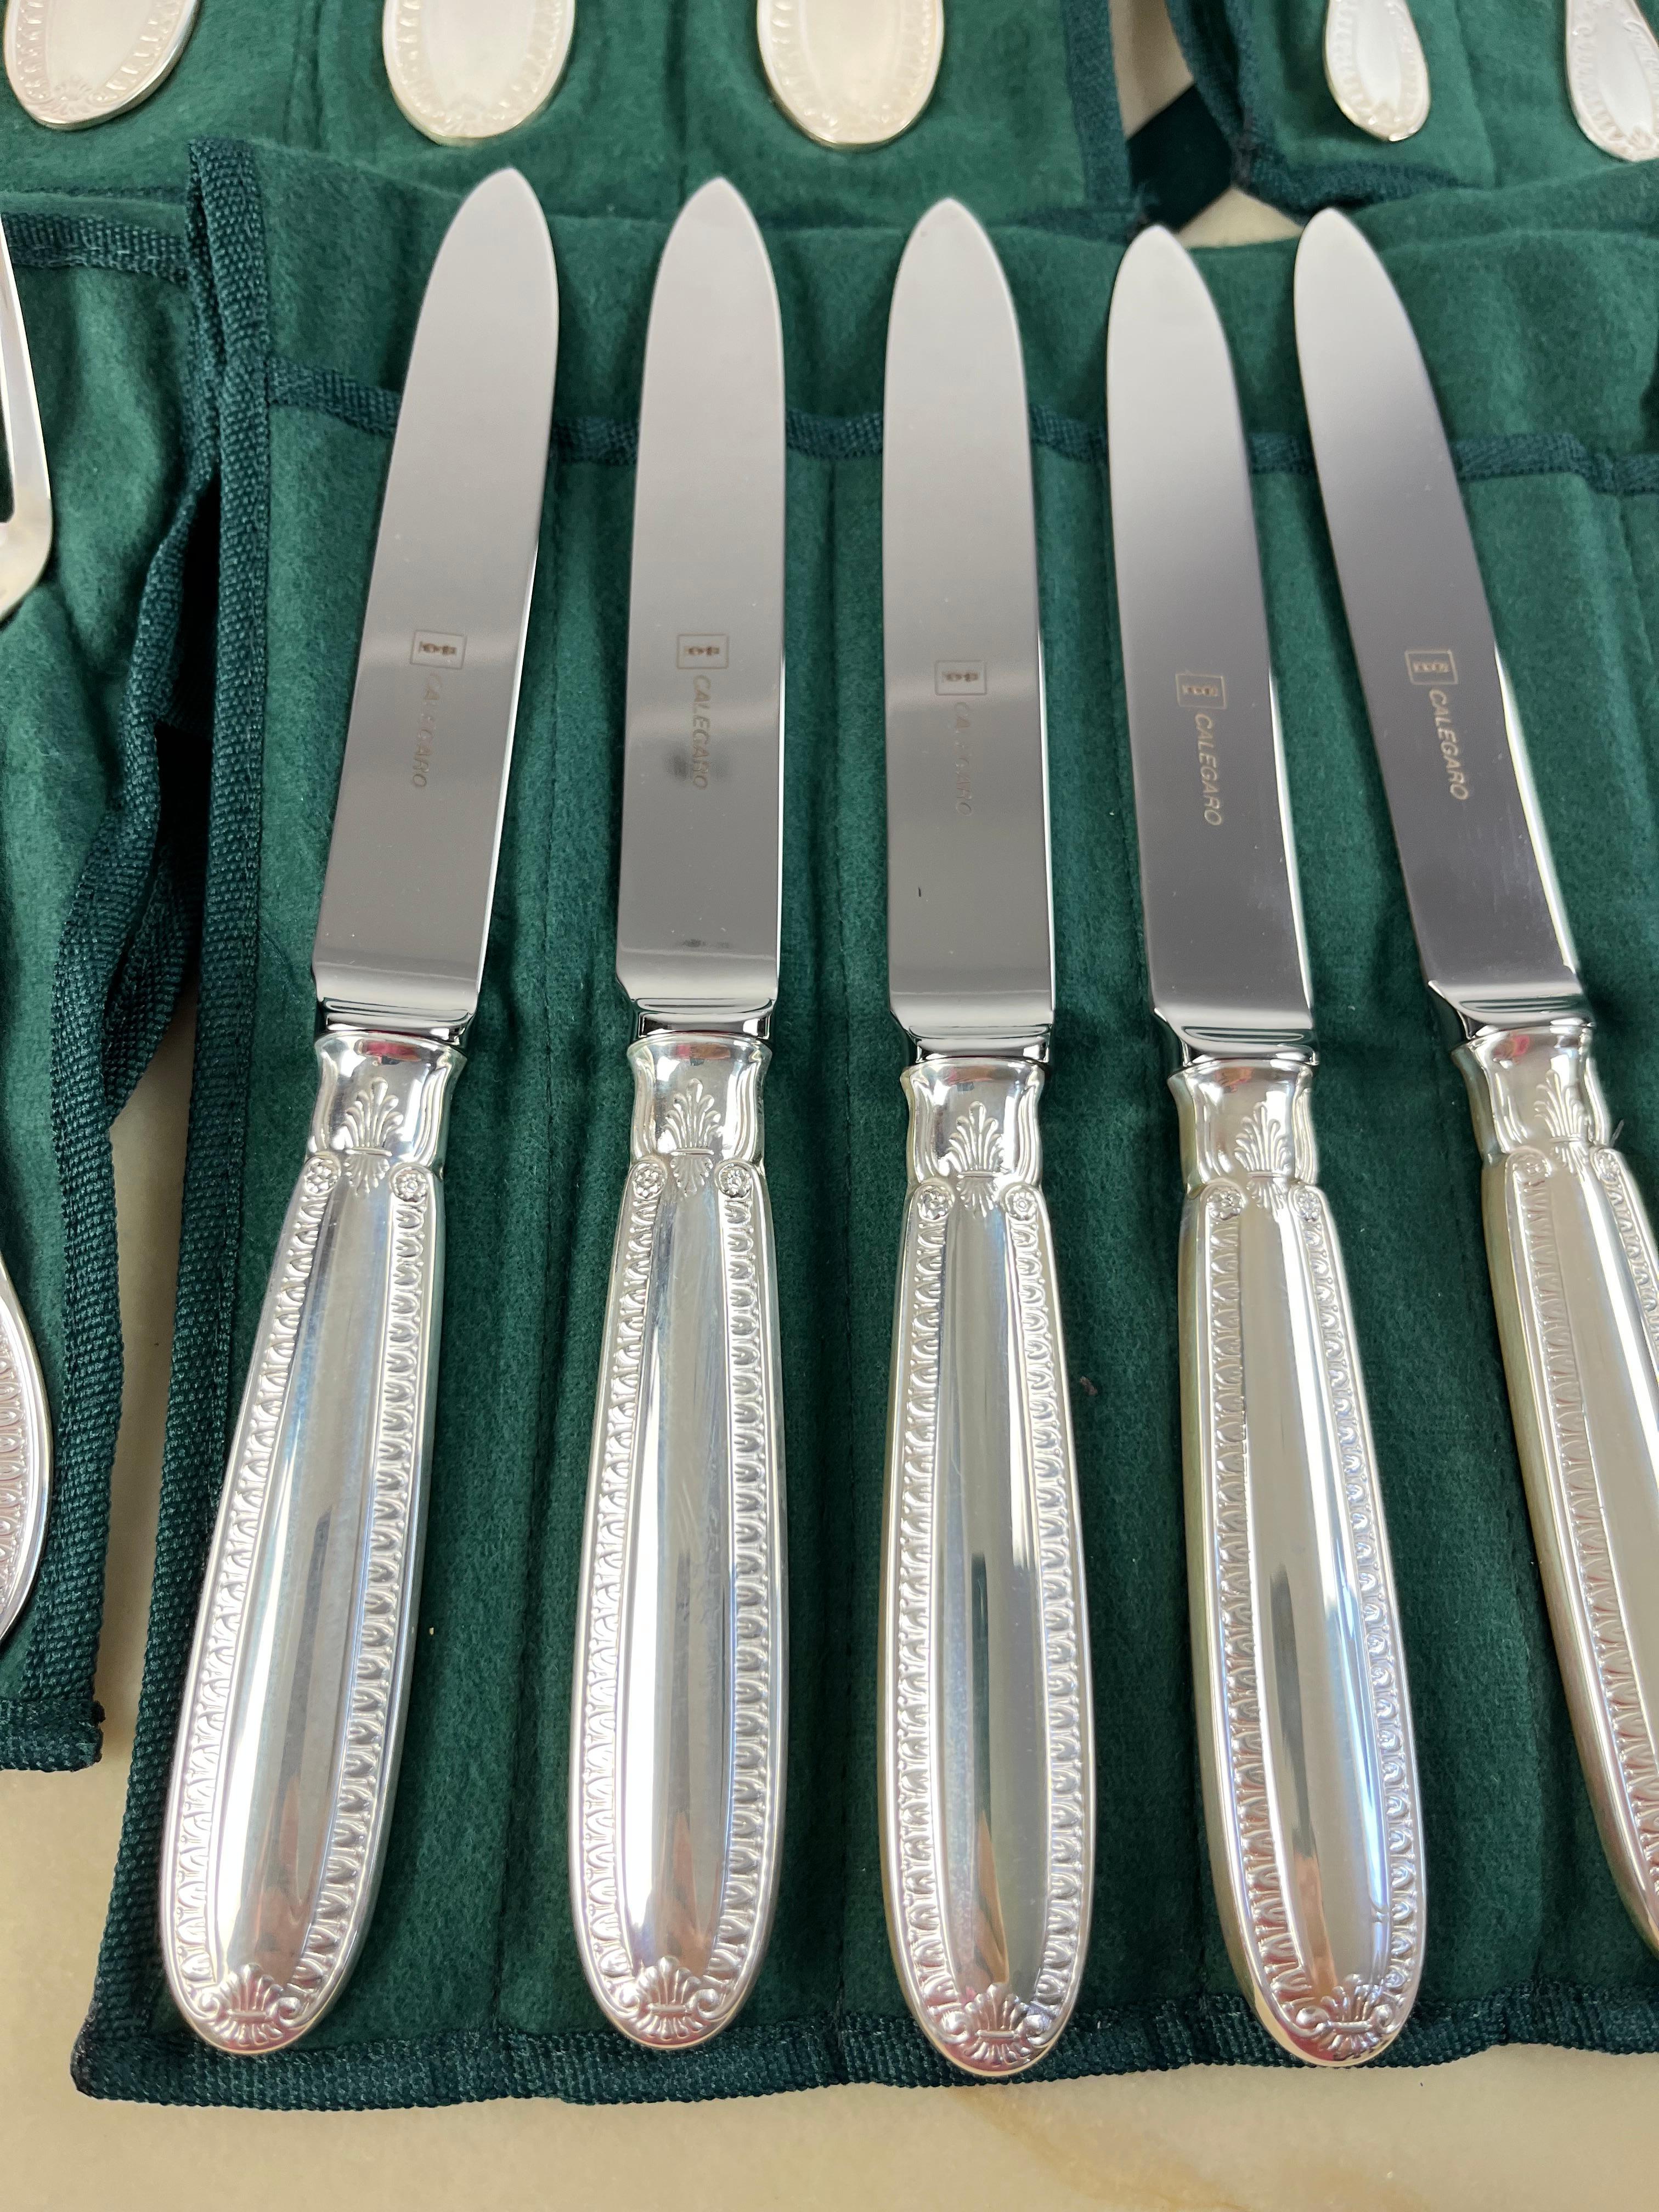 Cutlery set 101 pcs. Calegaro empire style silver 800, Italy, 90s
This set is for 12 people and also has cutlery for the fish.
Very beautiful and elegant it has its antioxidant cases.
Gross weight gr. 7404.00 (gr. 4764.00 excluding the blades of the